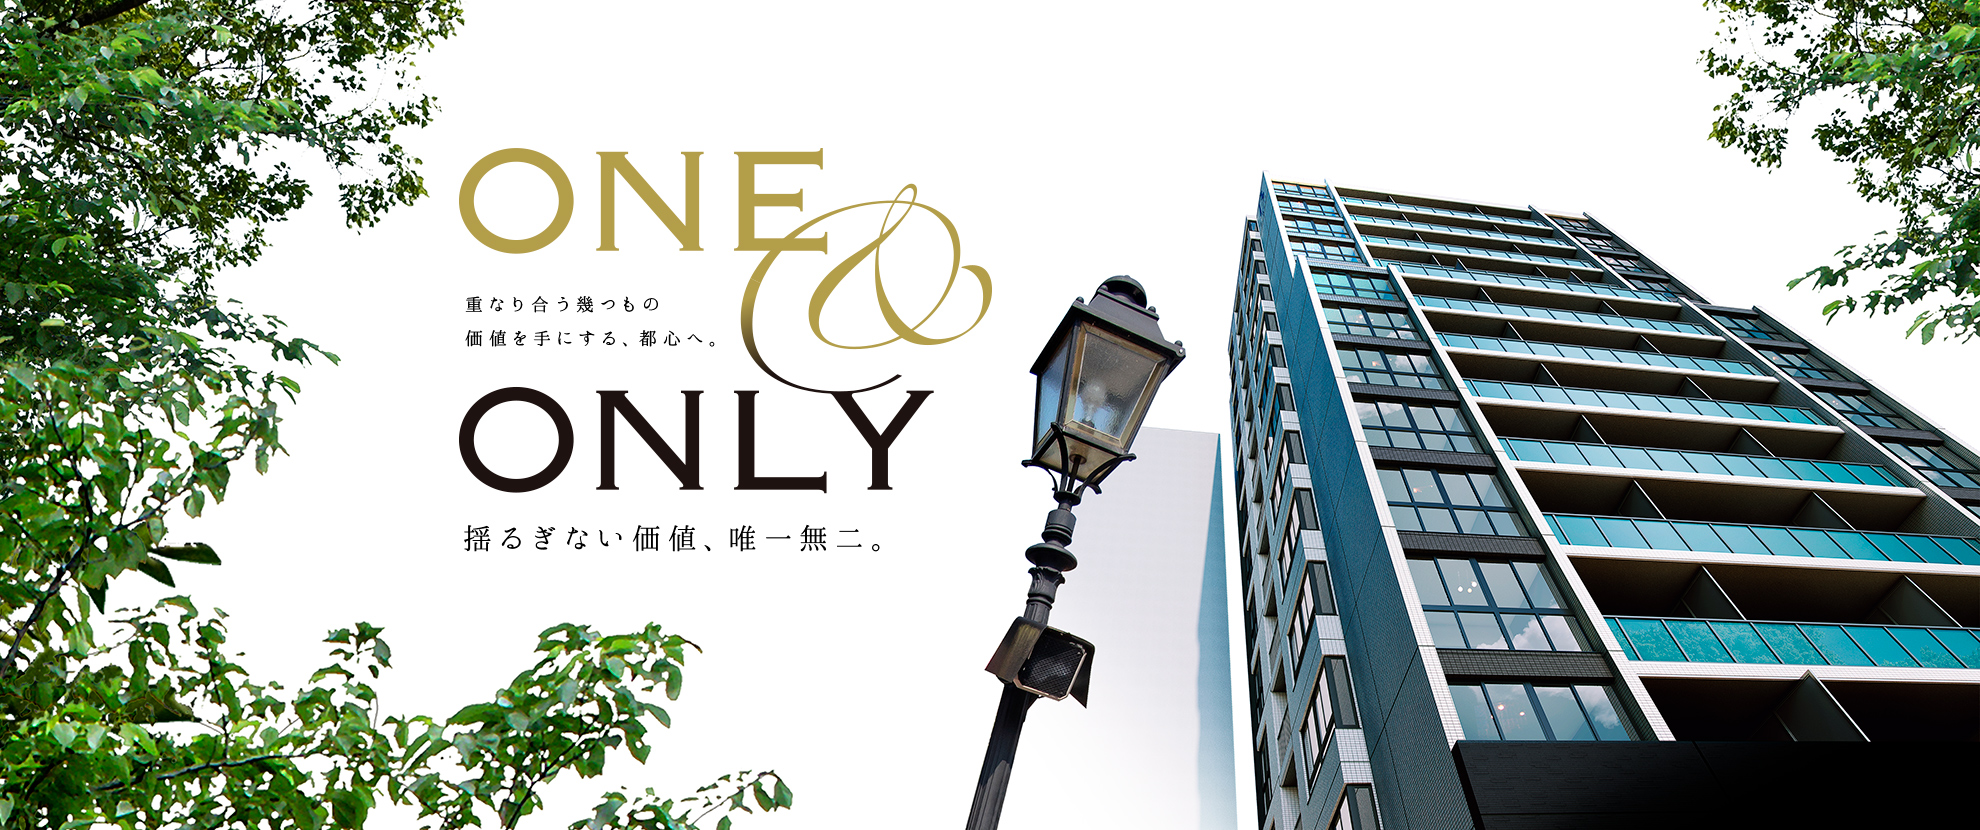 ONE and ONLY 揺るぎない価値、唯一無二。